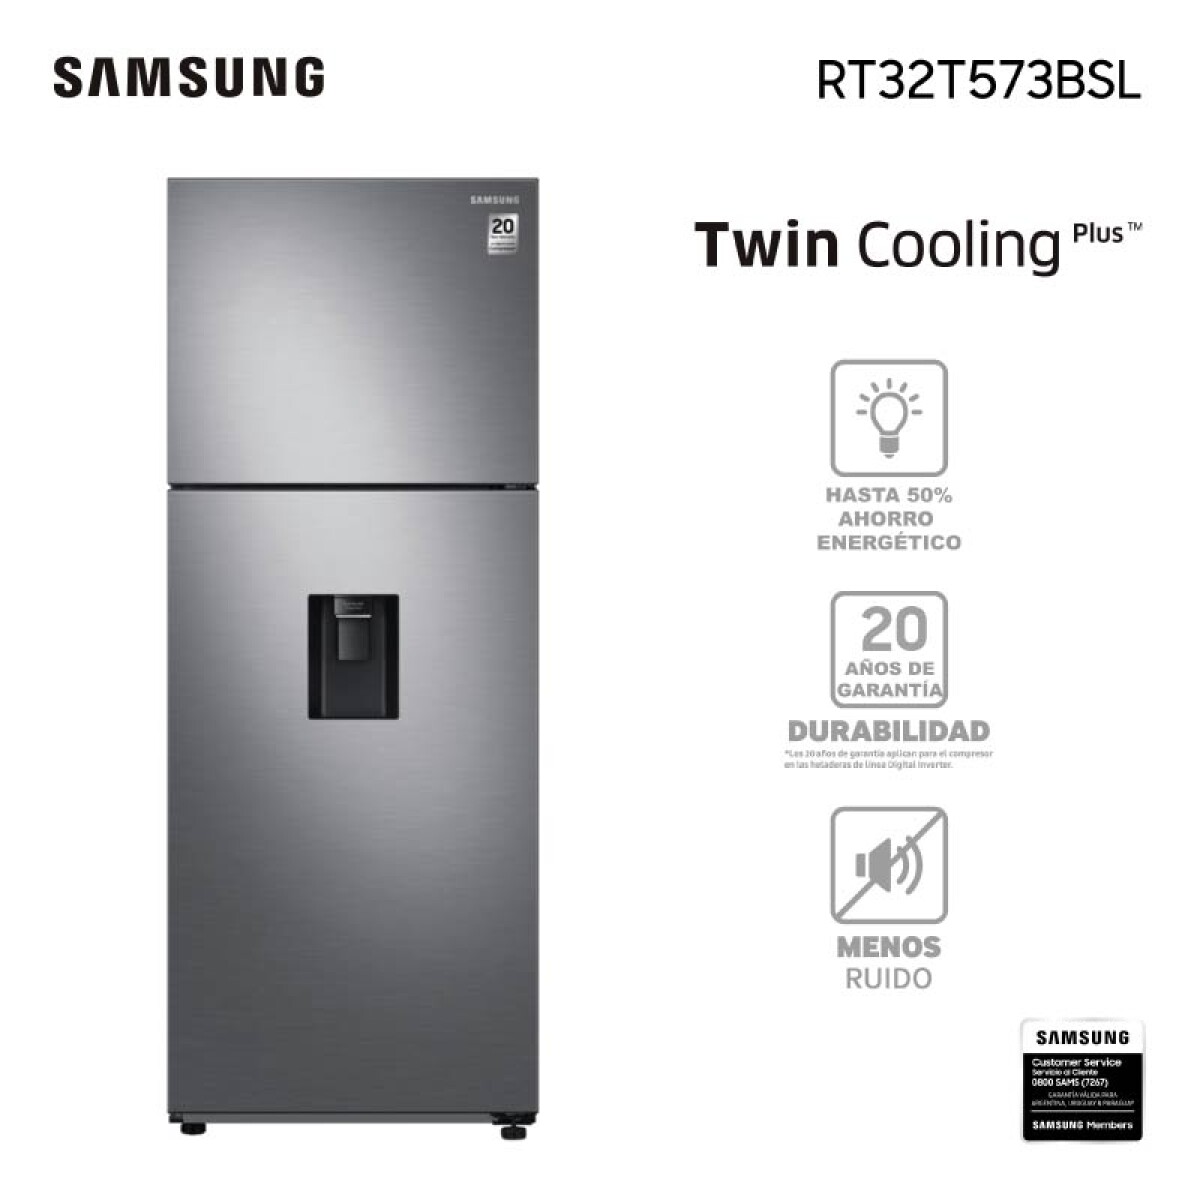 Heladera Samsung Twin Cooling SART32T573BSL - SILVER 